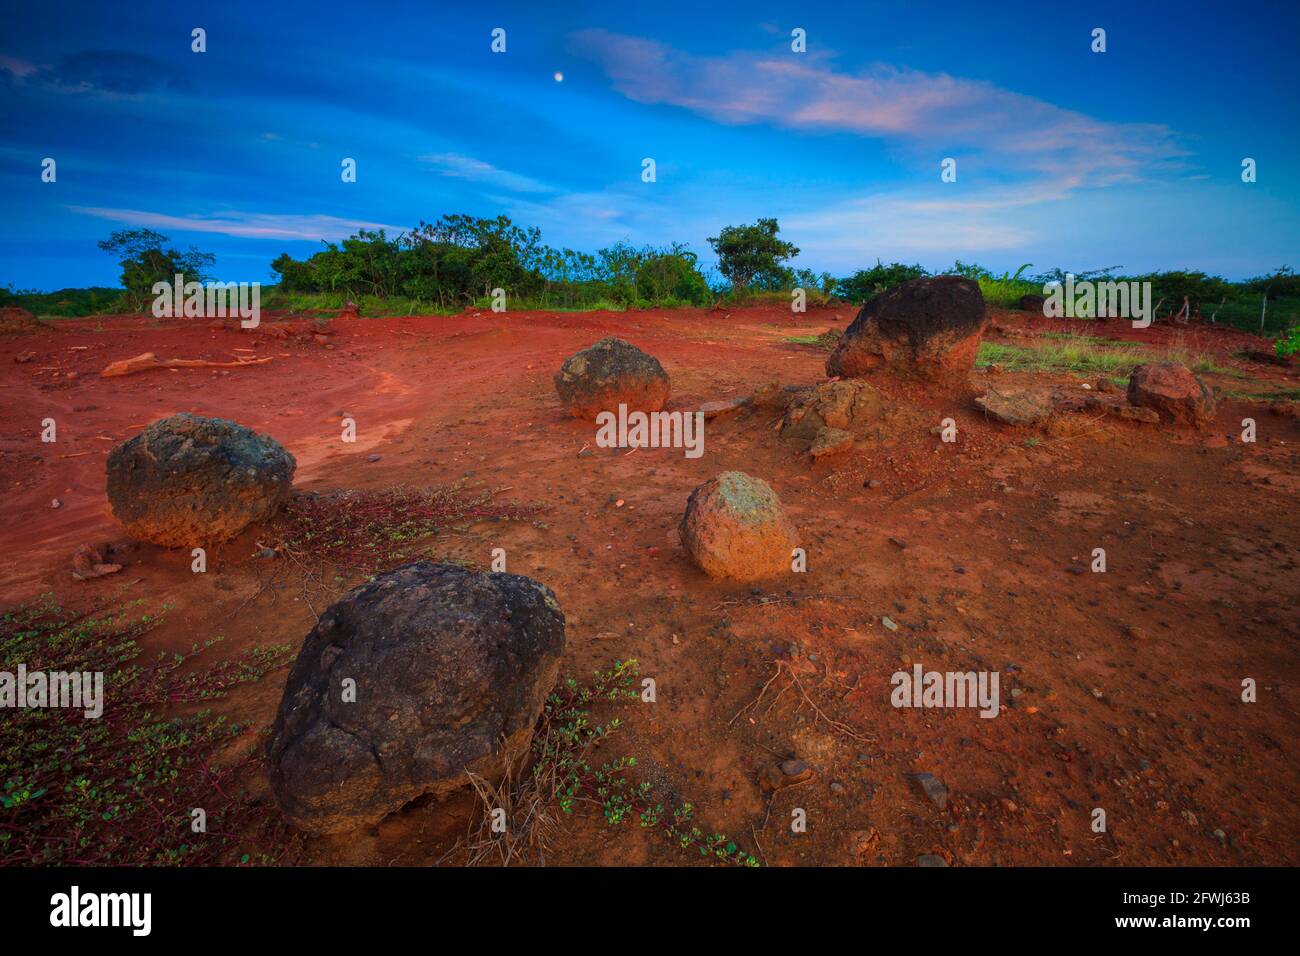 Panama landscape in evening light with moon, red desert soil, and large boulders in Sarigua national park, Herrera province, Republic of Panama. Stock Photo